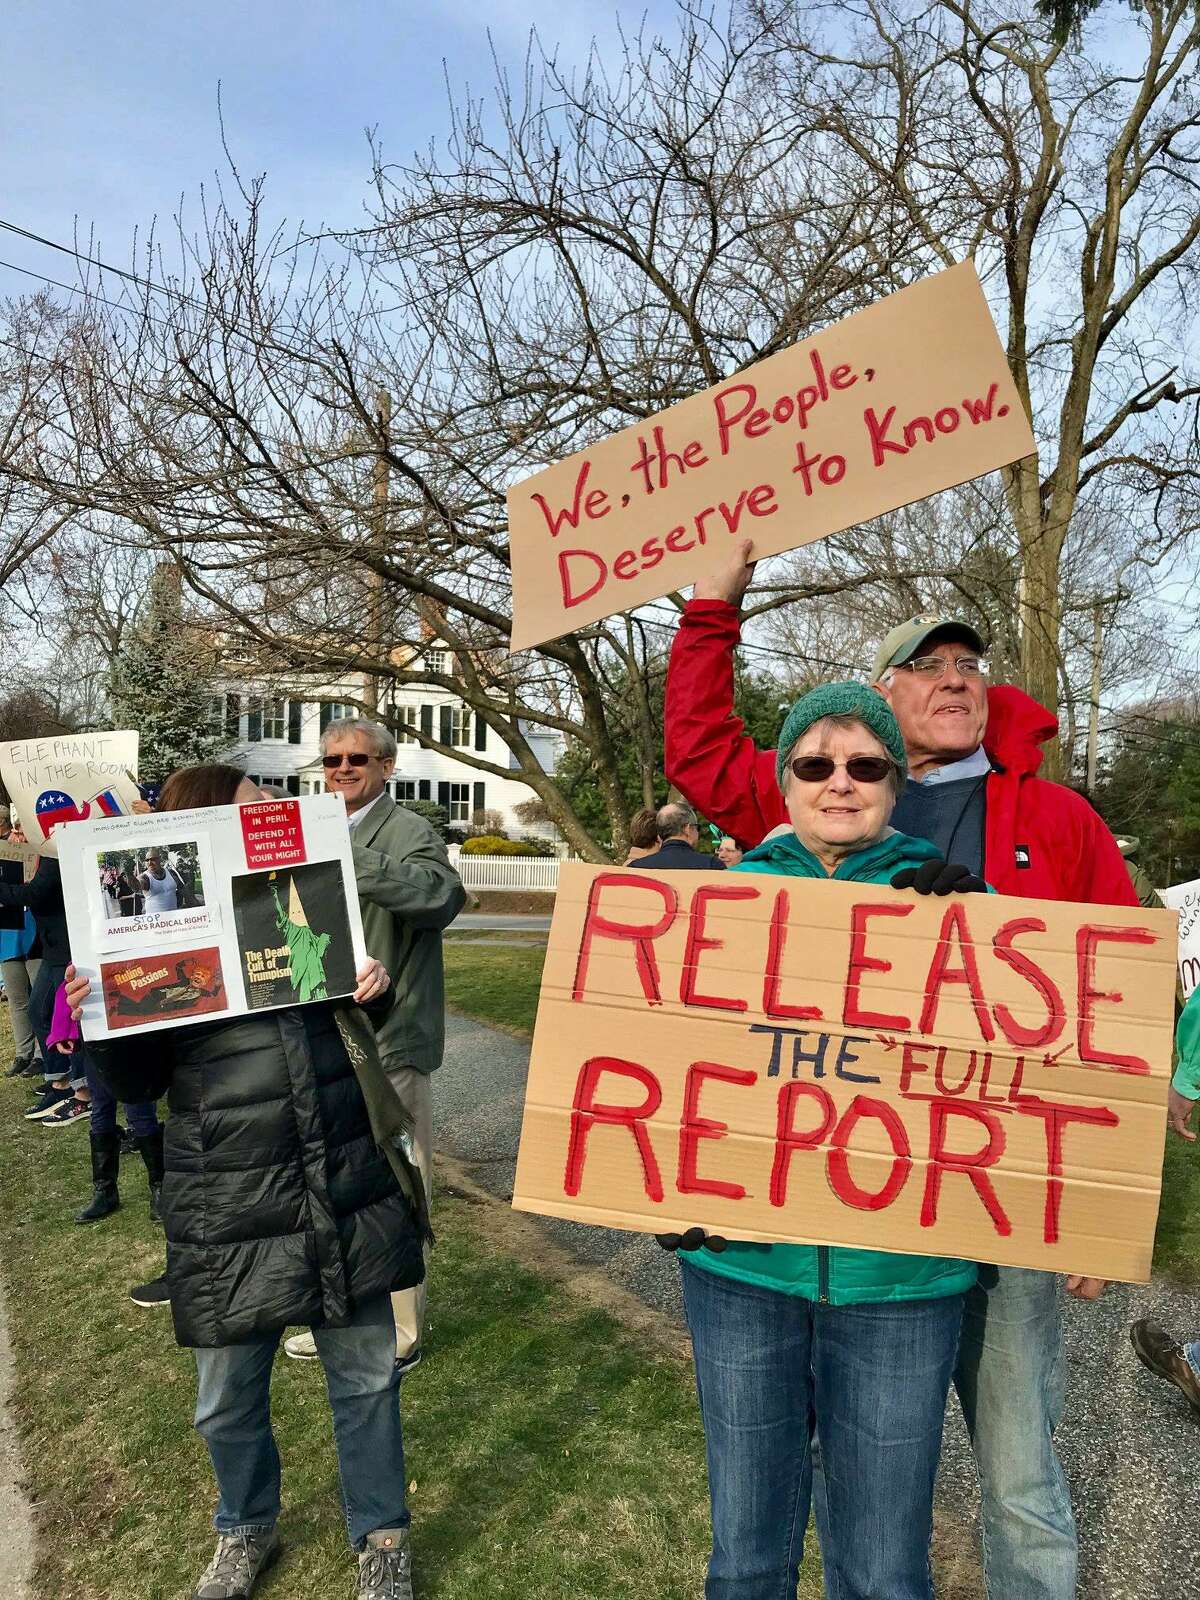 Protestors gather at Old Town Hall Green to call for the full release of special counsel Robert Mueller's report.